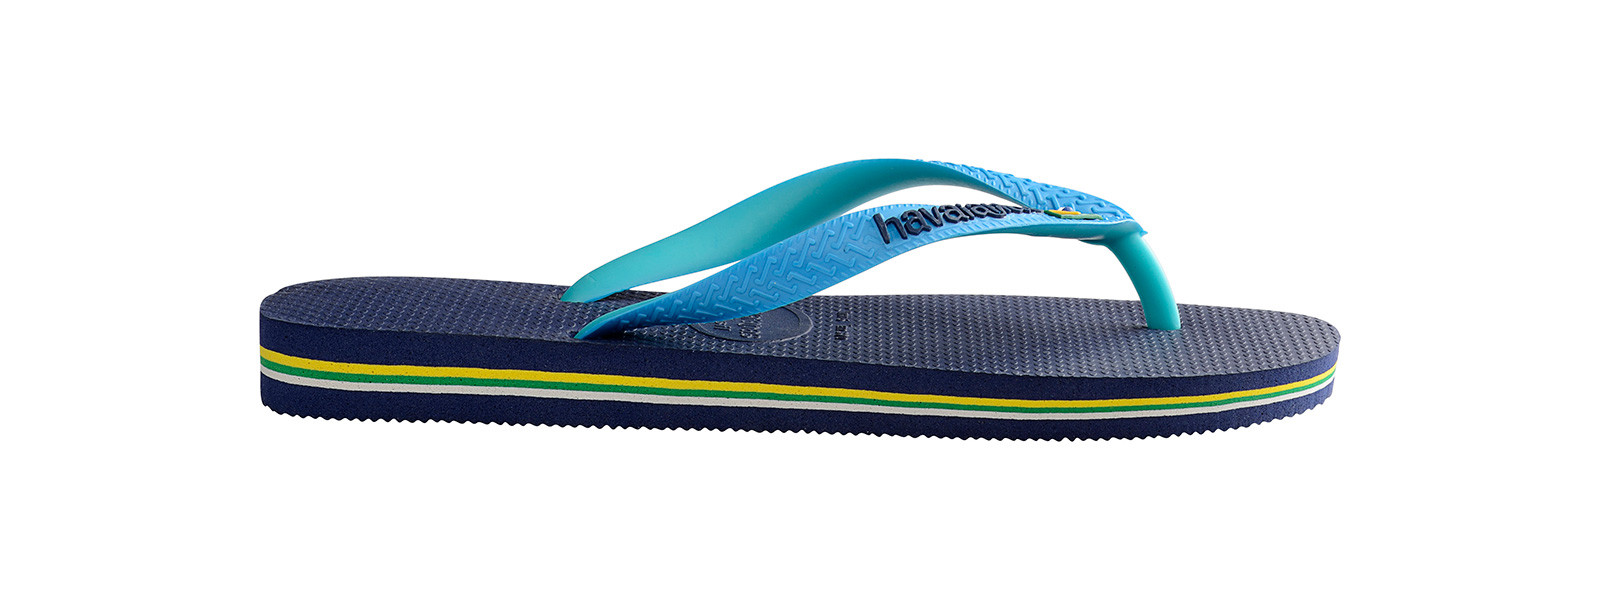 Two-toned Flip Flops Featuring A Navy Blue Footbed And Turquoise Straps ...